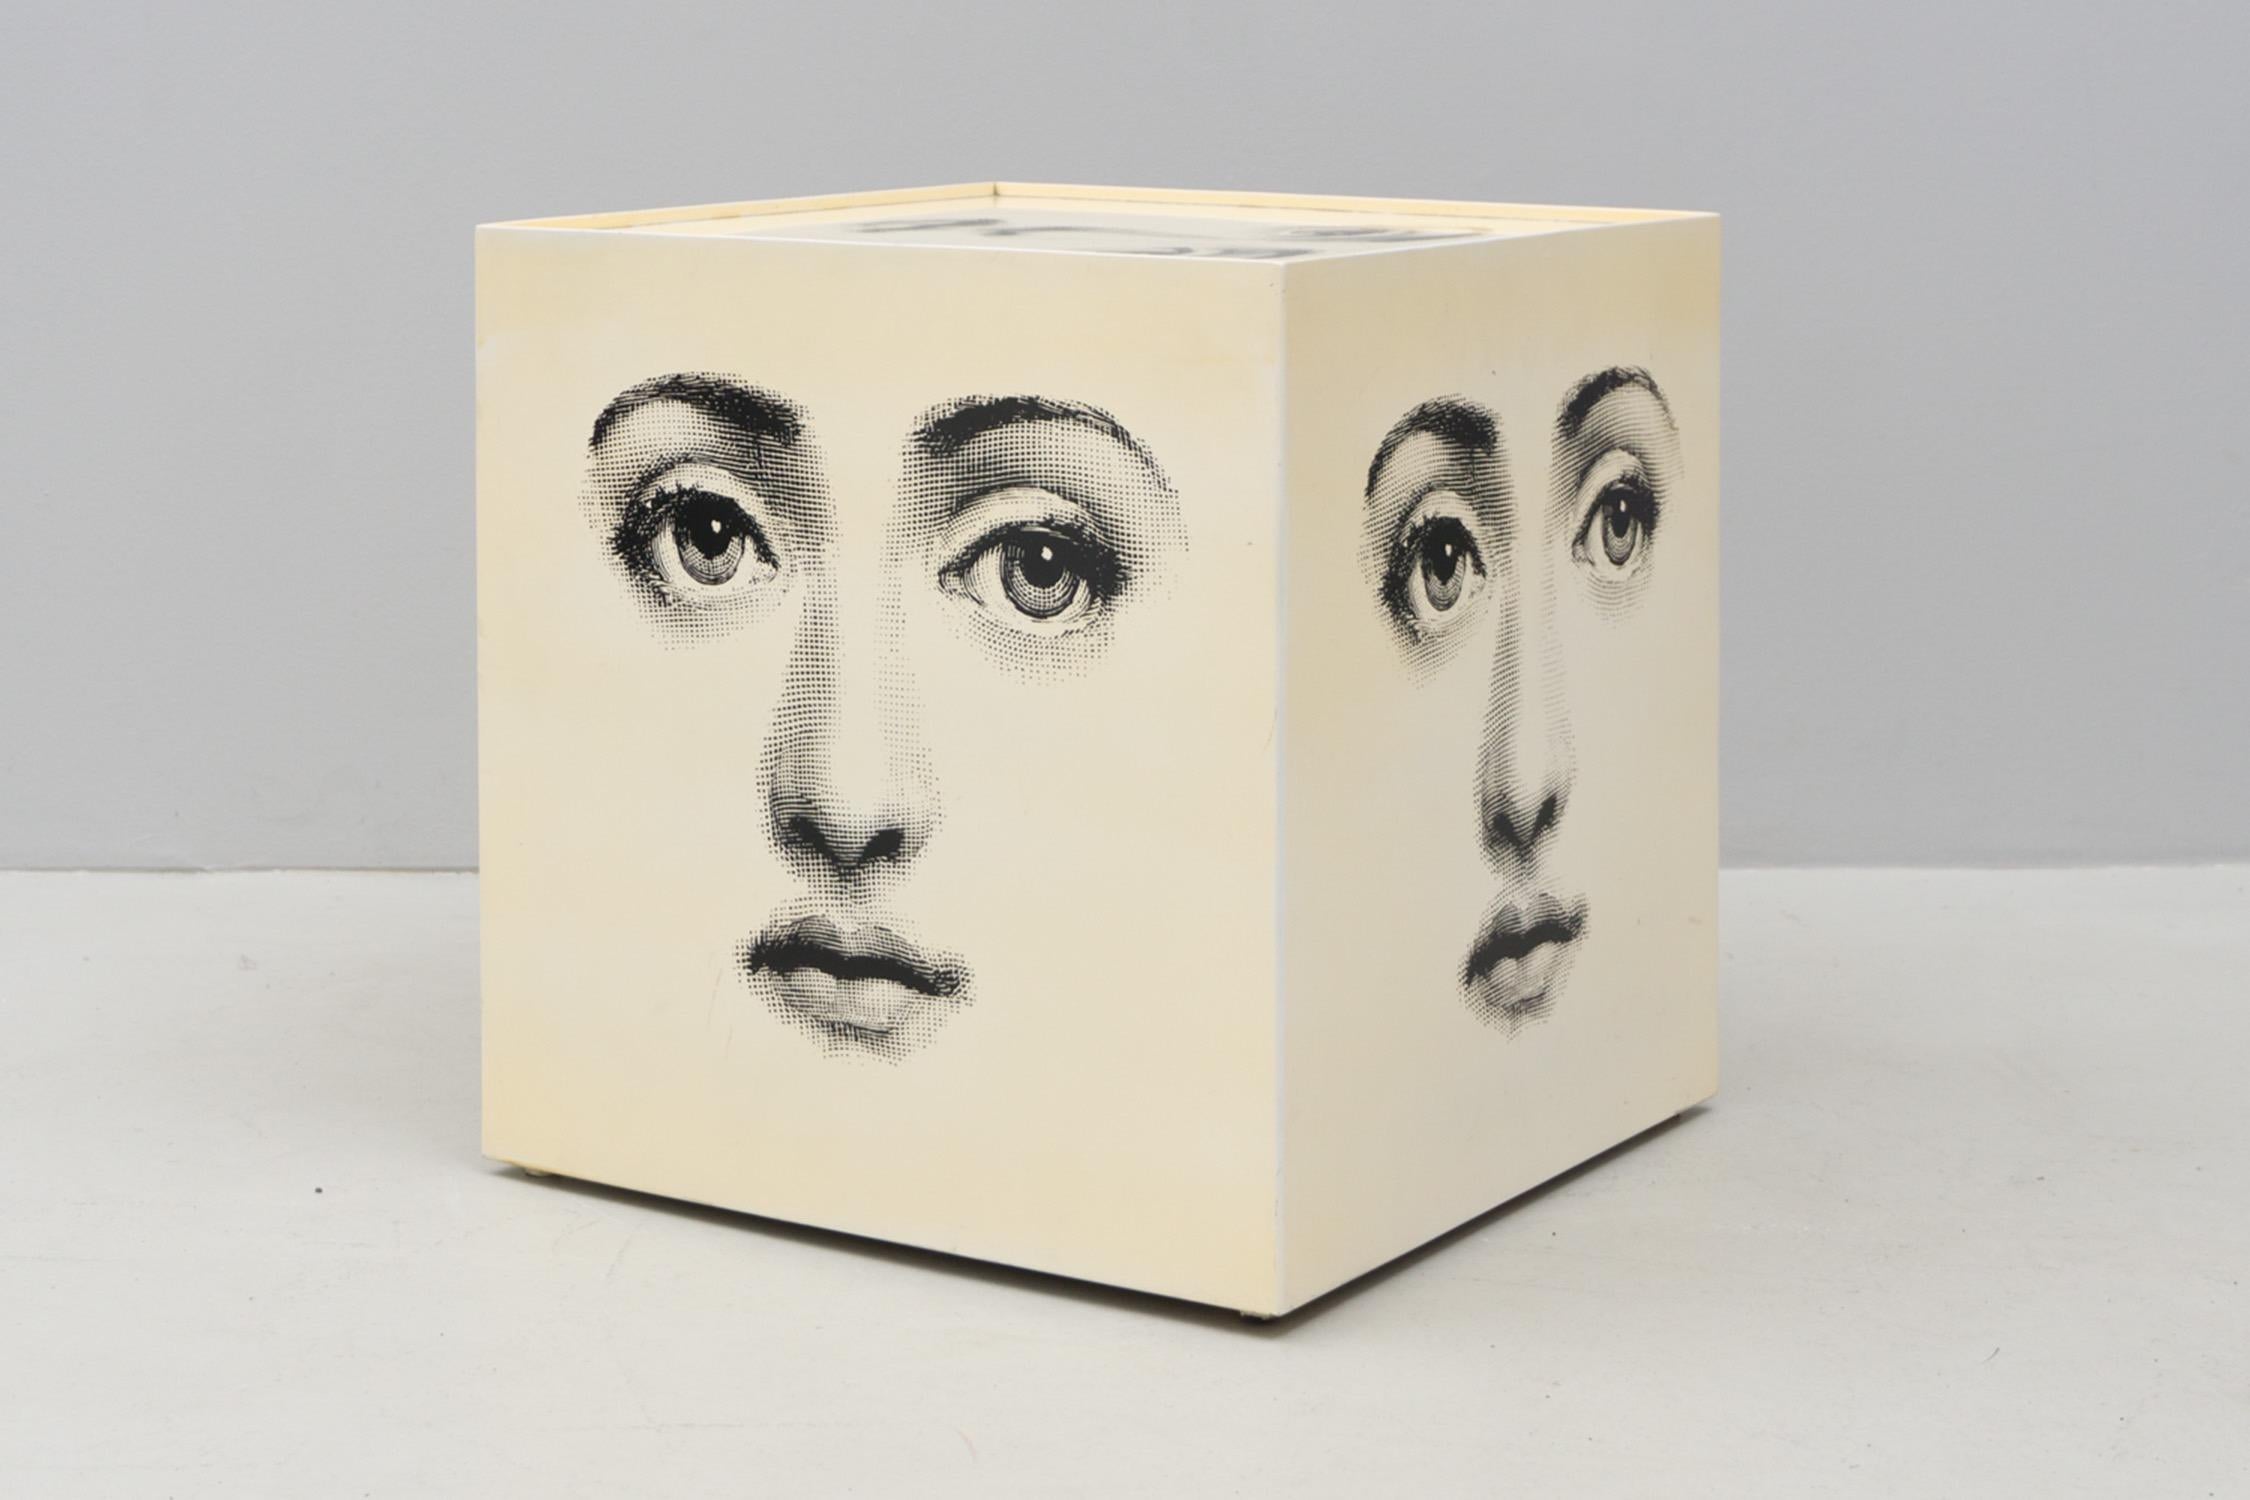 Cream enameled metal with screen print on surface. Original, labeled Fornasatti. 


'Piero Fornasetti (18 November 1913, in Milan – 15 October 1988) was an Italian versatile and eclectic artist, characterised by an unstoppable creative flair that